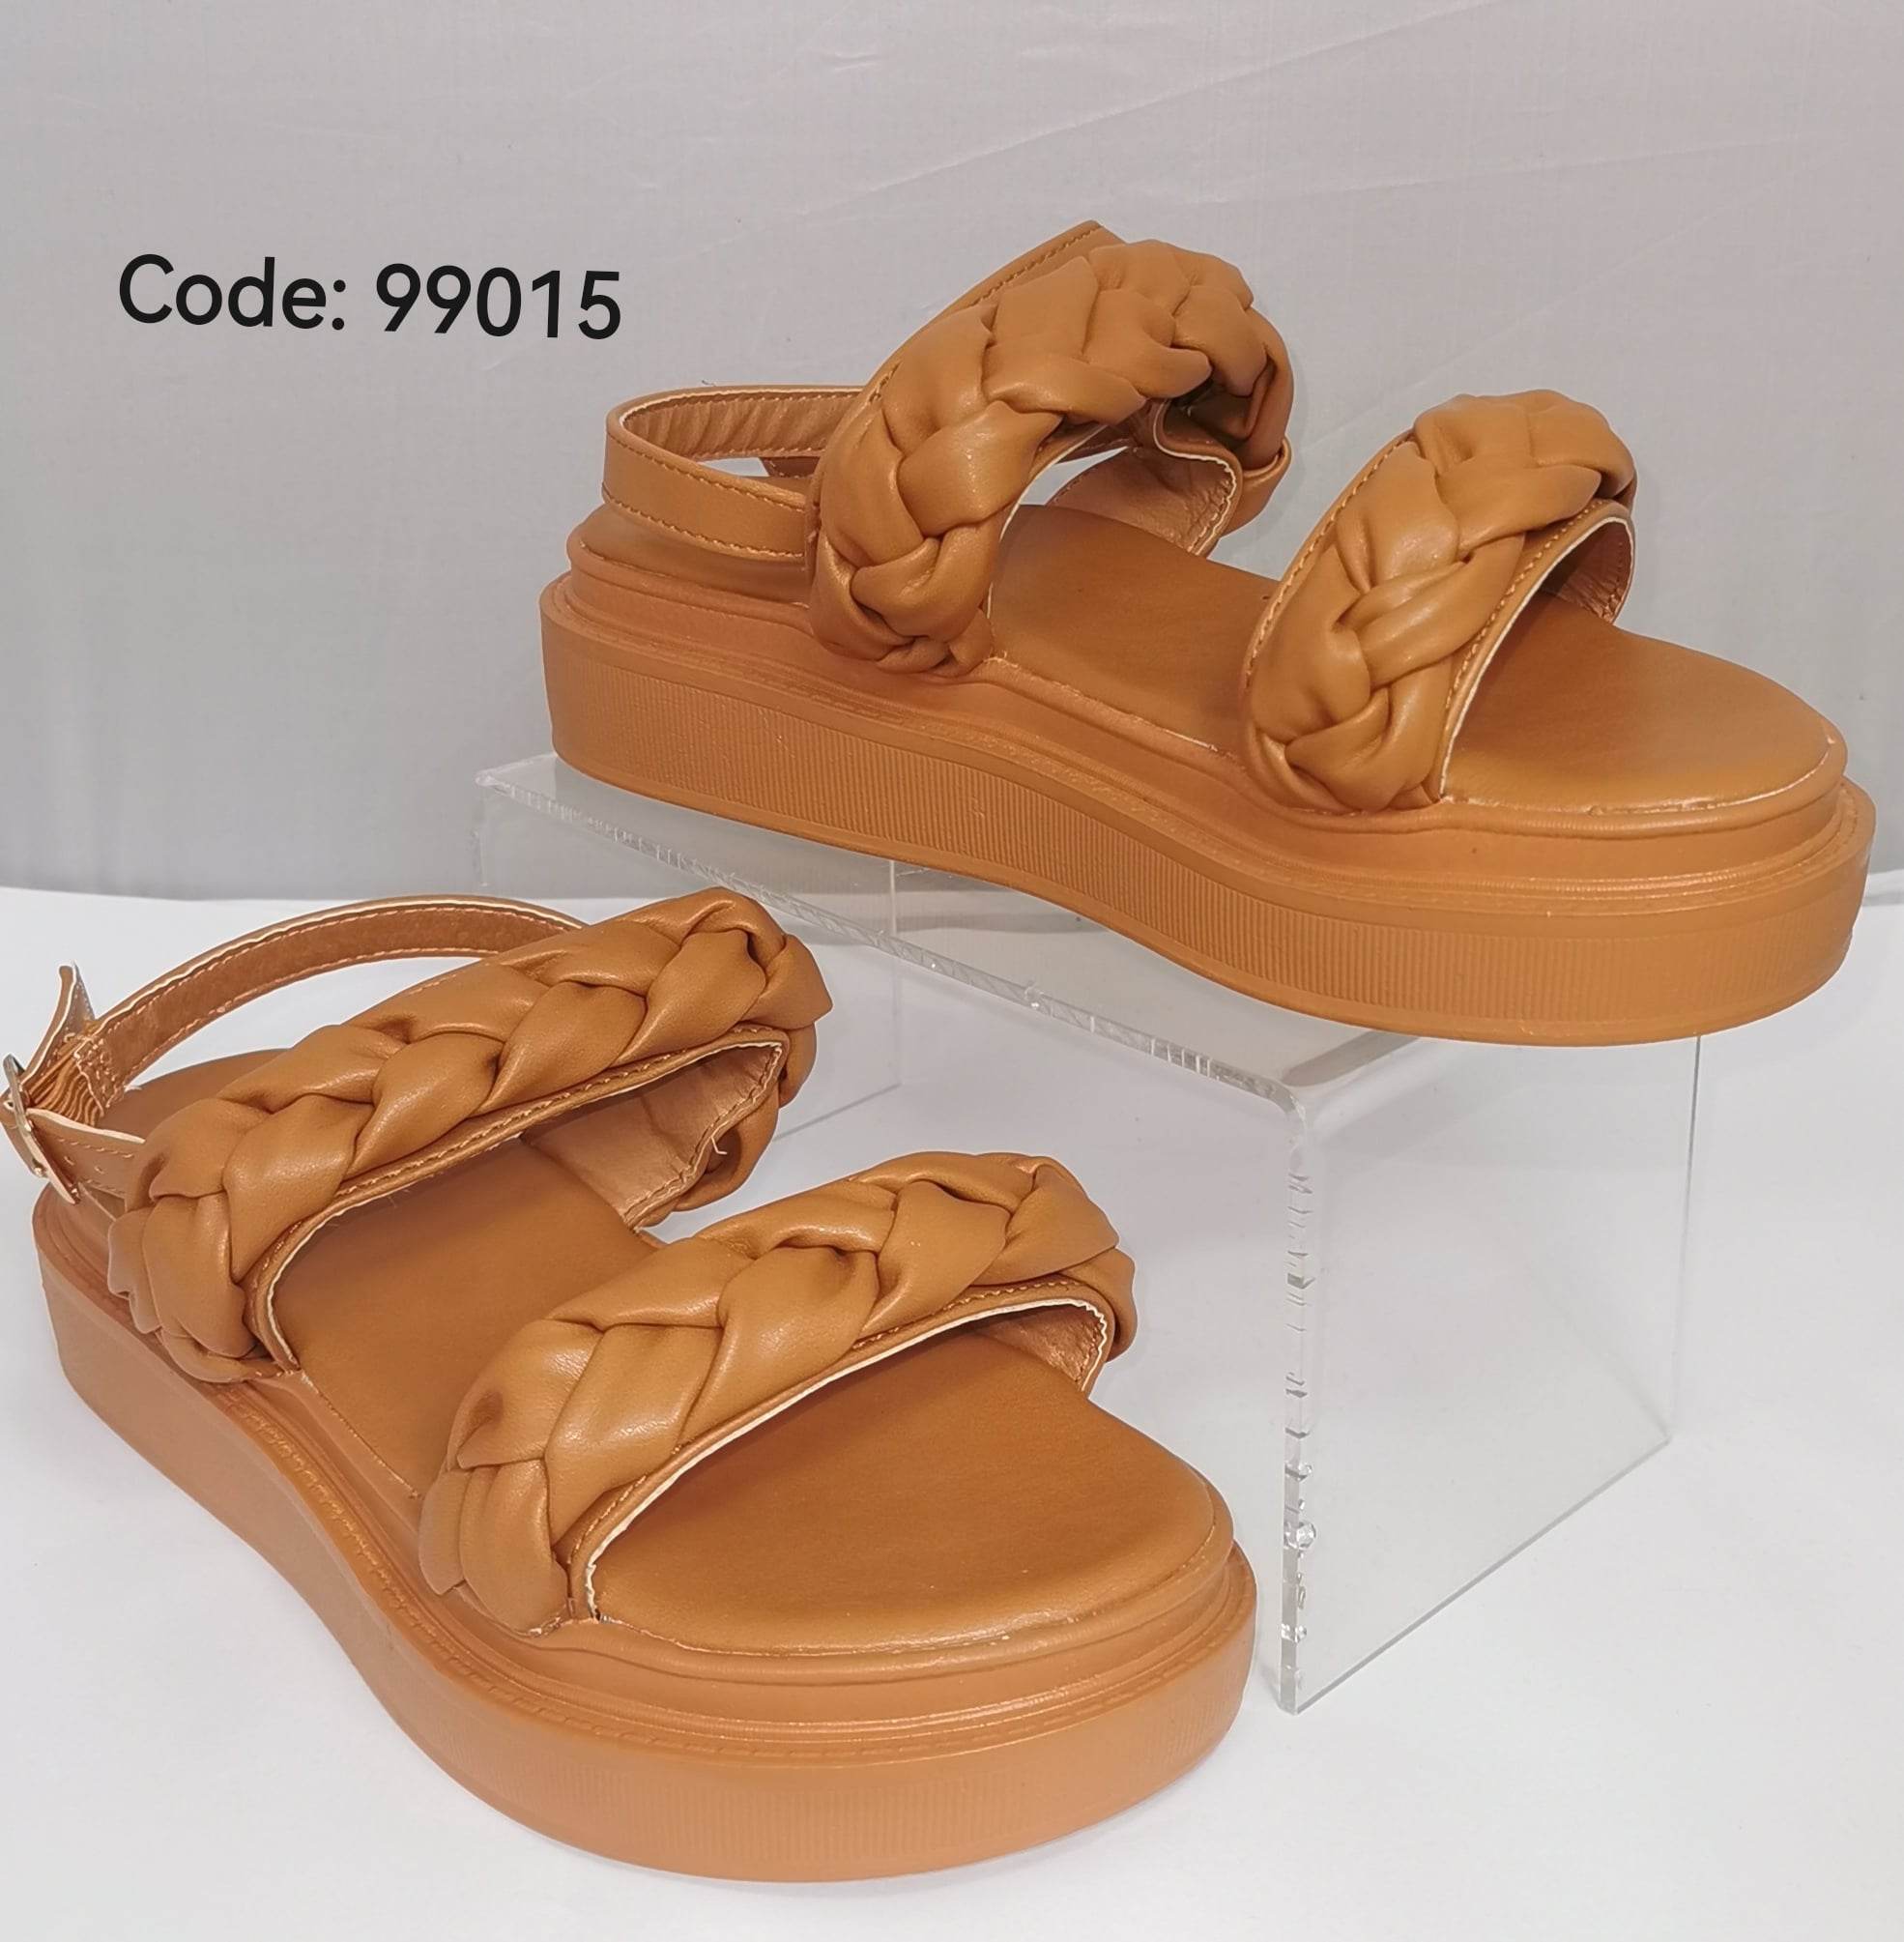 SHOES ITALY 23/23 MONOX. SANDAL FLAT WITH BRAIDS